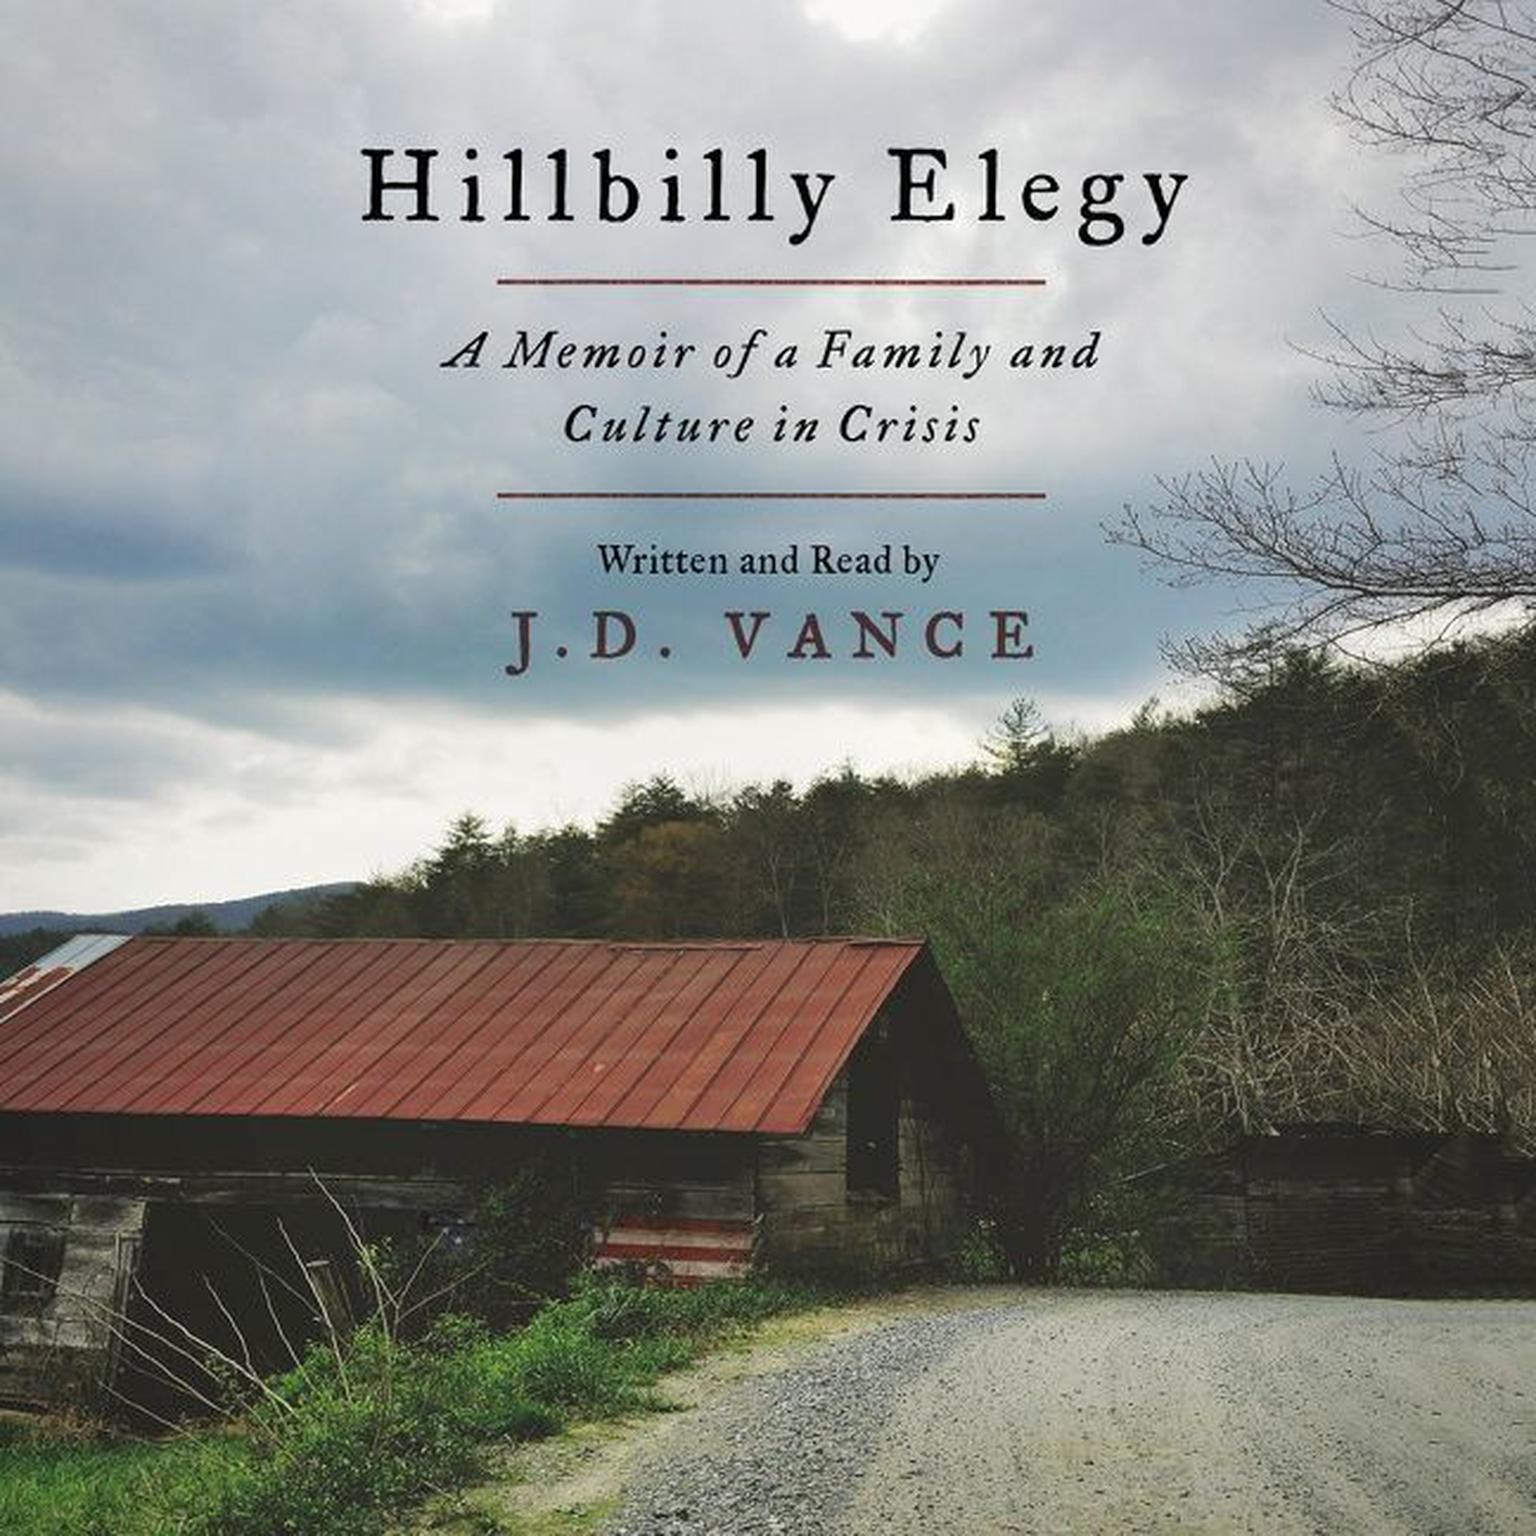 Hillbilly Elegy: A Memoir of a Family and Culture in Crisis Audiobook, by J. D. Vance